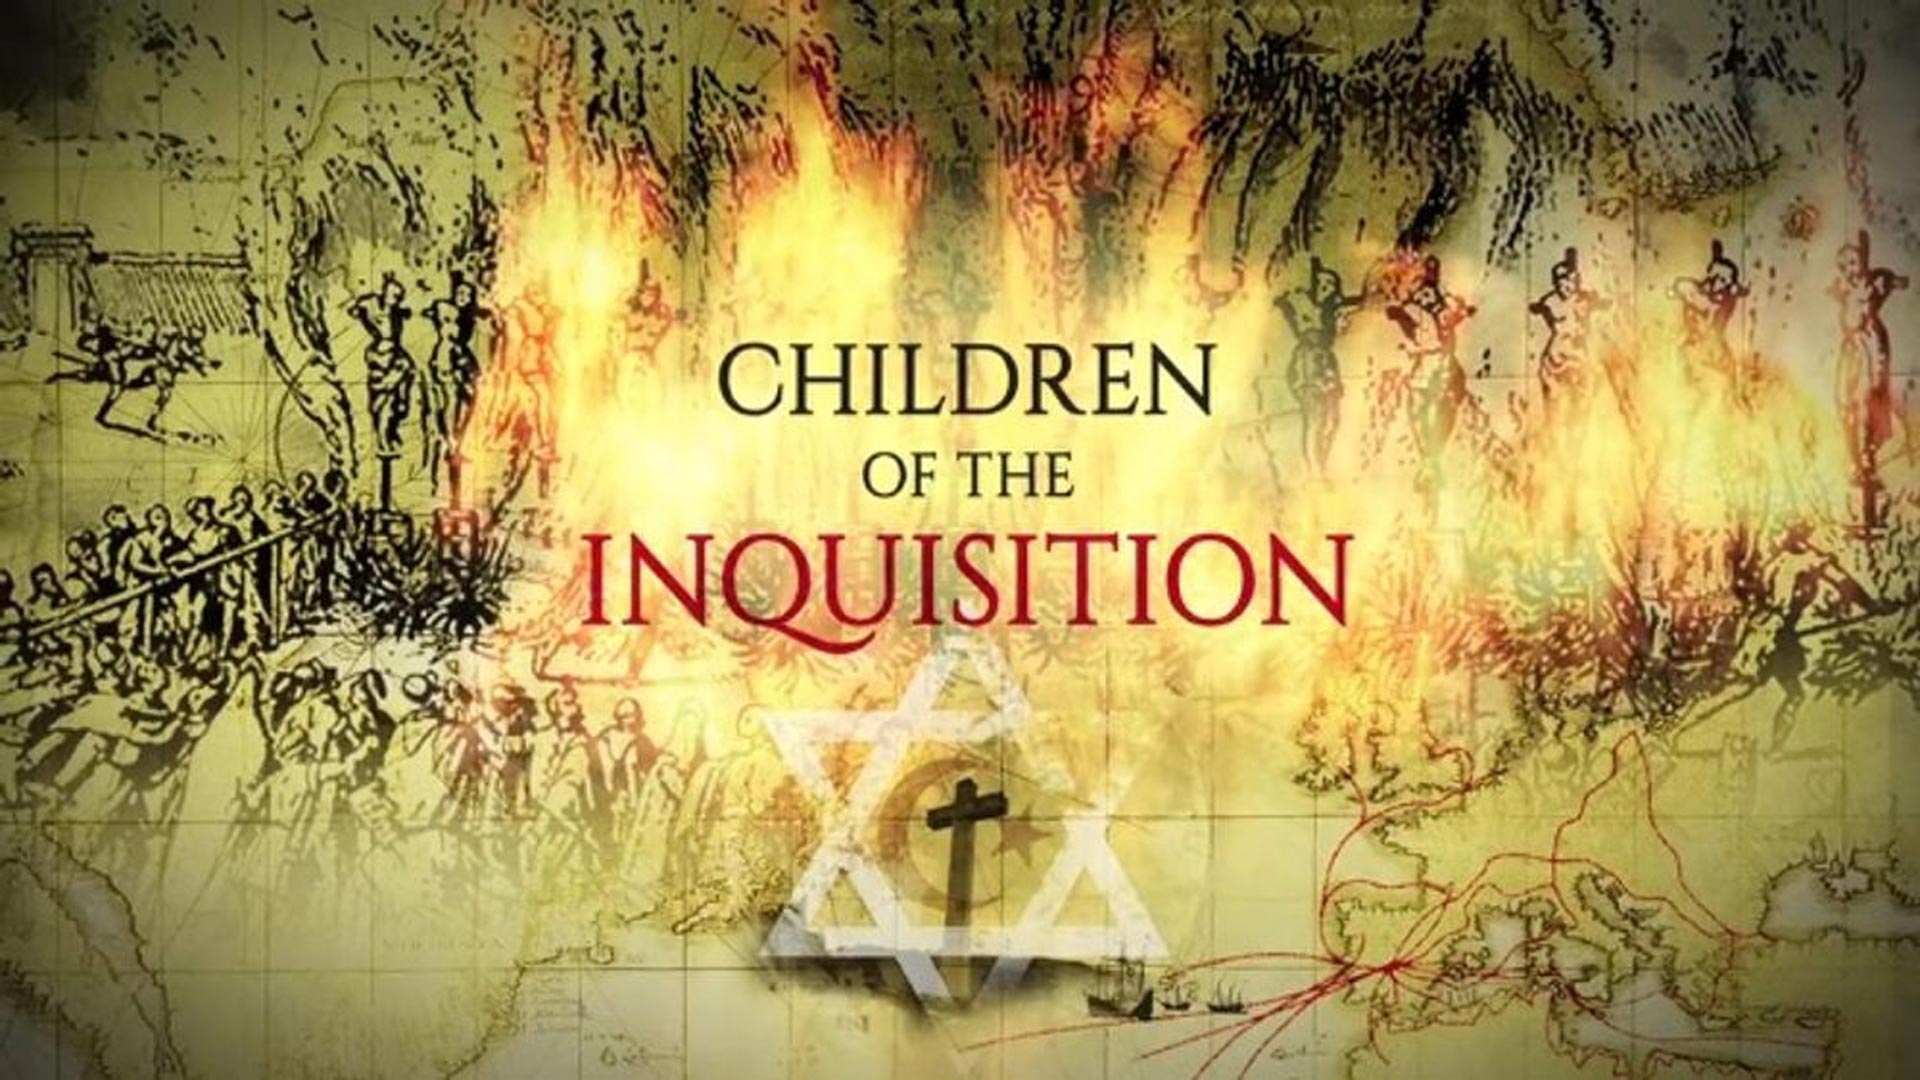 Centered is the text Children of the Inquisition, with old illistrations of the spanish inquisition burning.  A cross and star of david are below text.